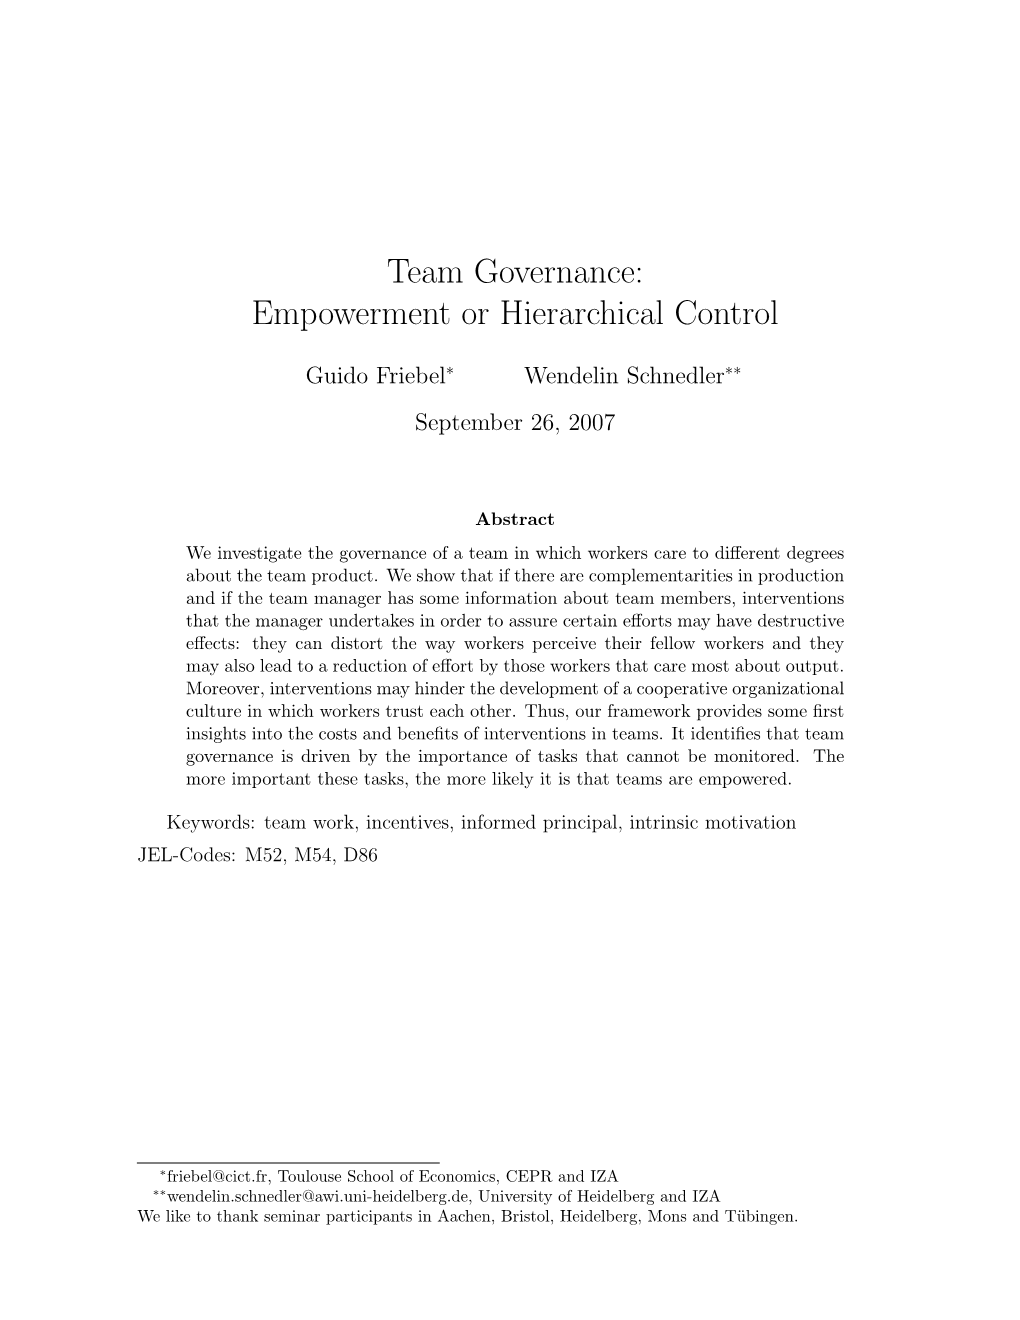 Team Governance: Empowerment Or Hierarchical Control